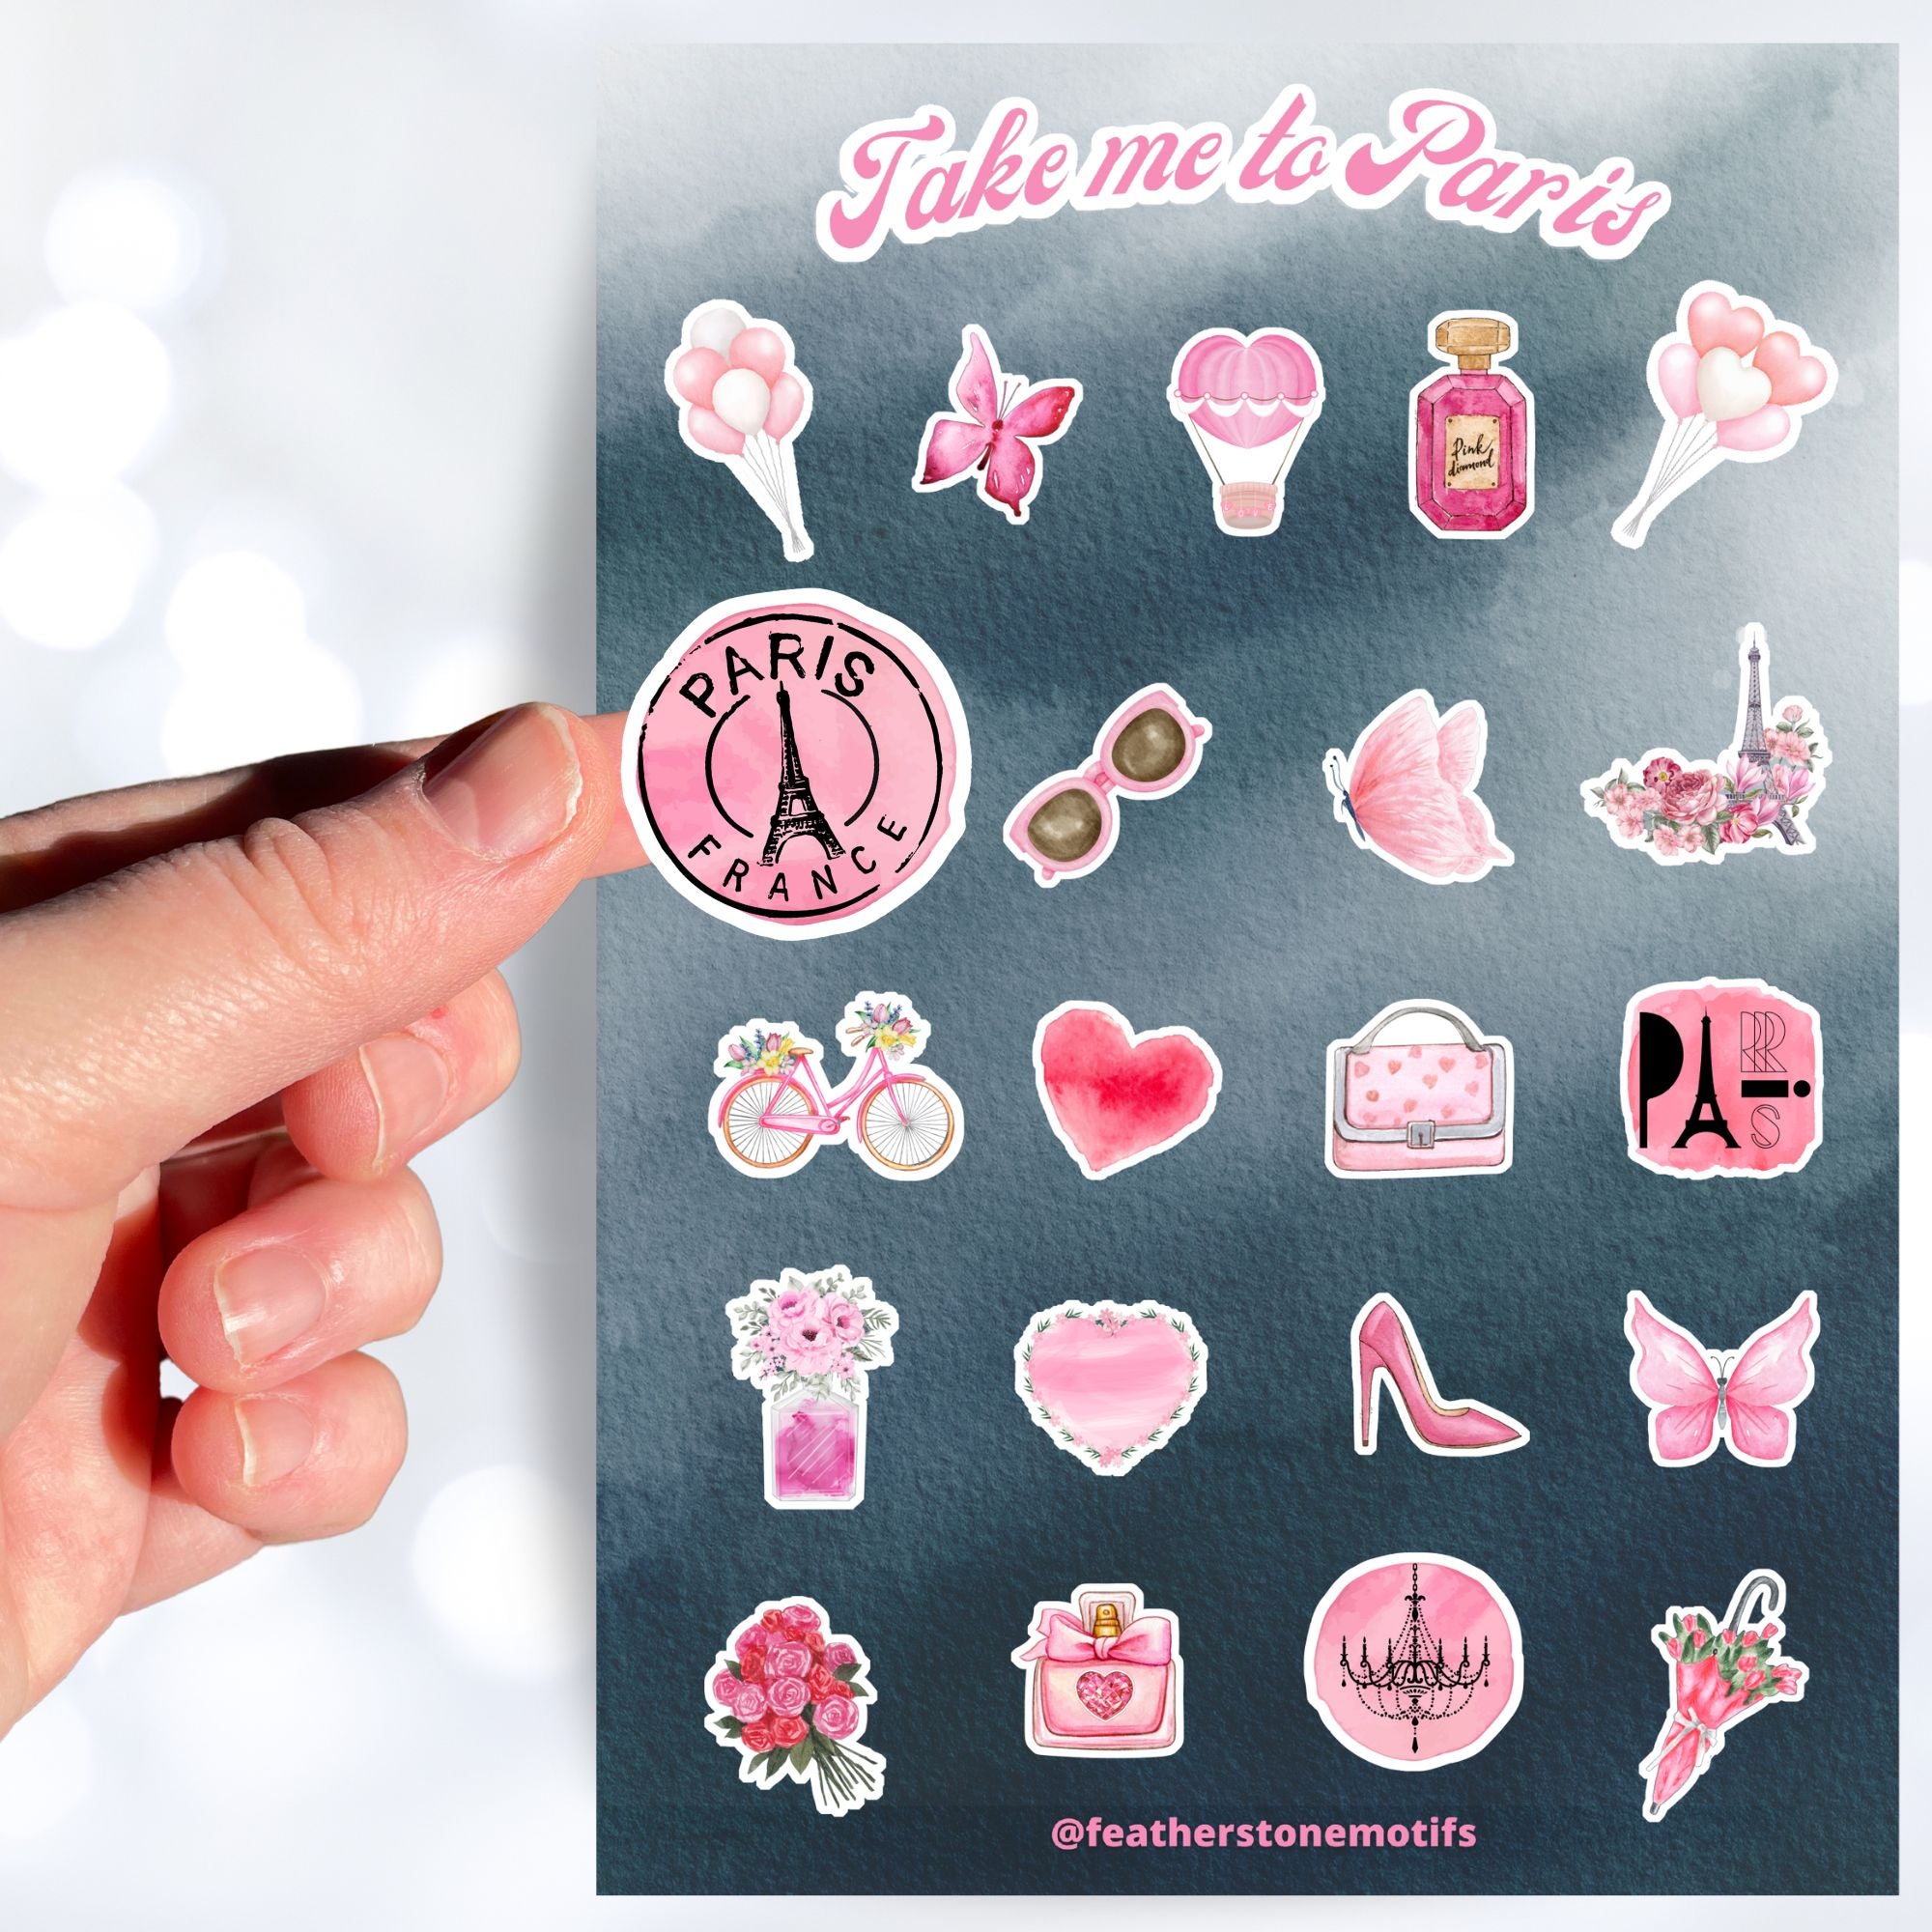  Celebrate everything Paris with this pink aesthetic on a gray background sticker sheet! Images include the Eifel Tower, perfume, balloons, and flowers. This image shows a hand holding a round sticker with an image of the Eifel Tower that says "Paris France" above the sticker sheet. 